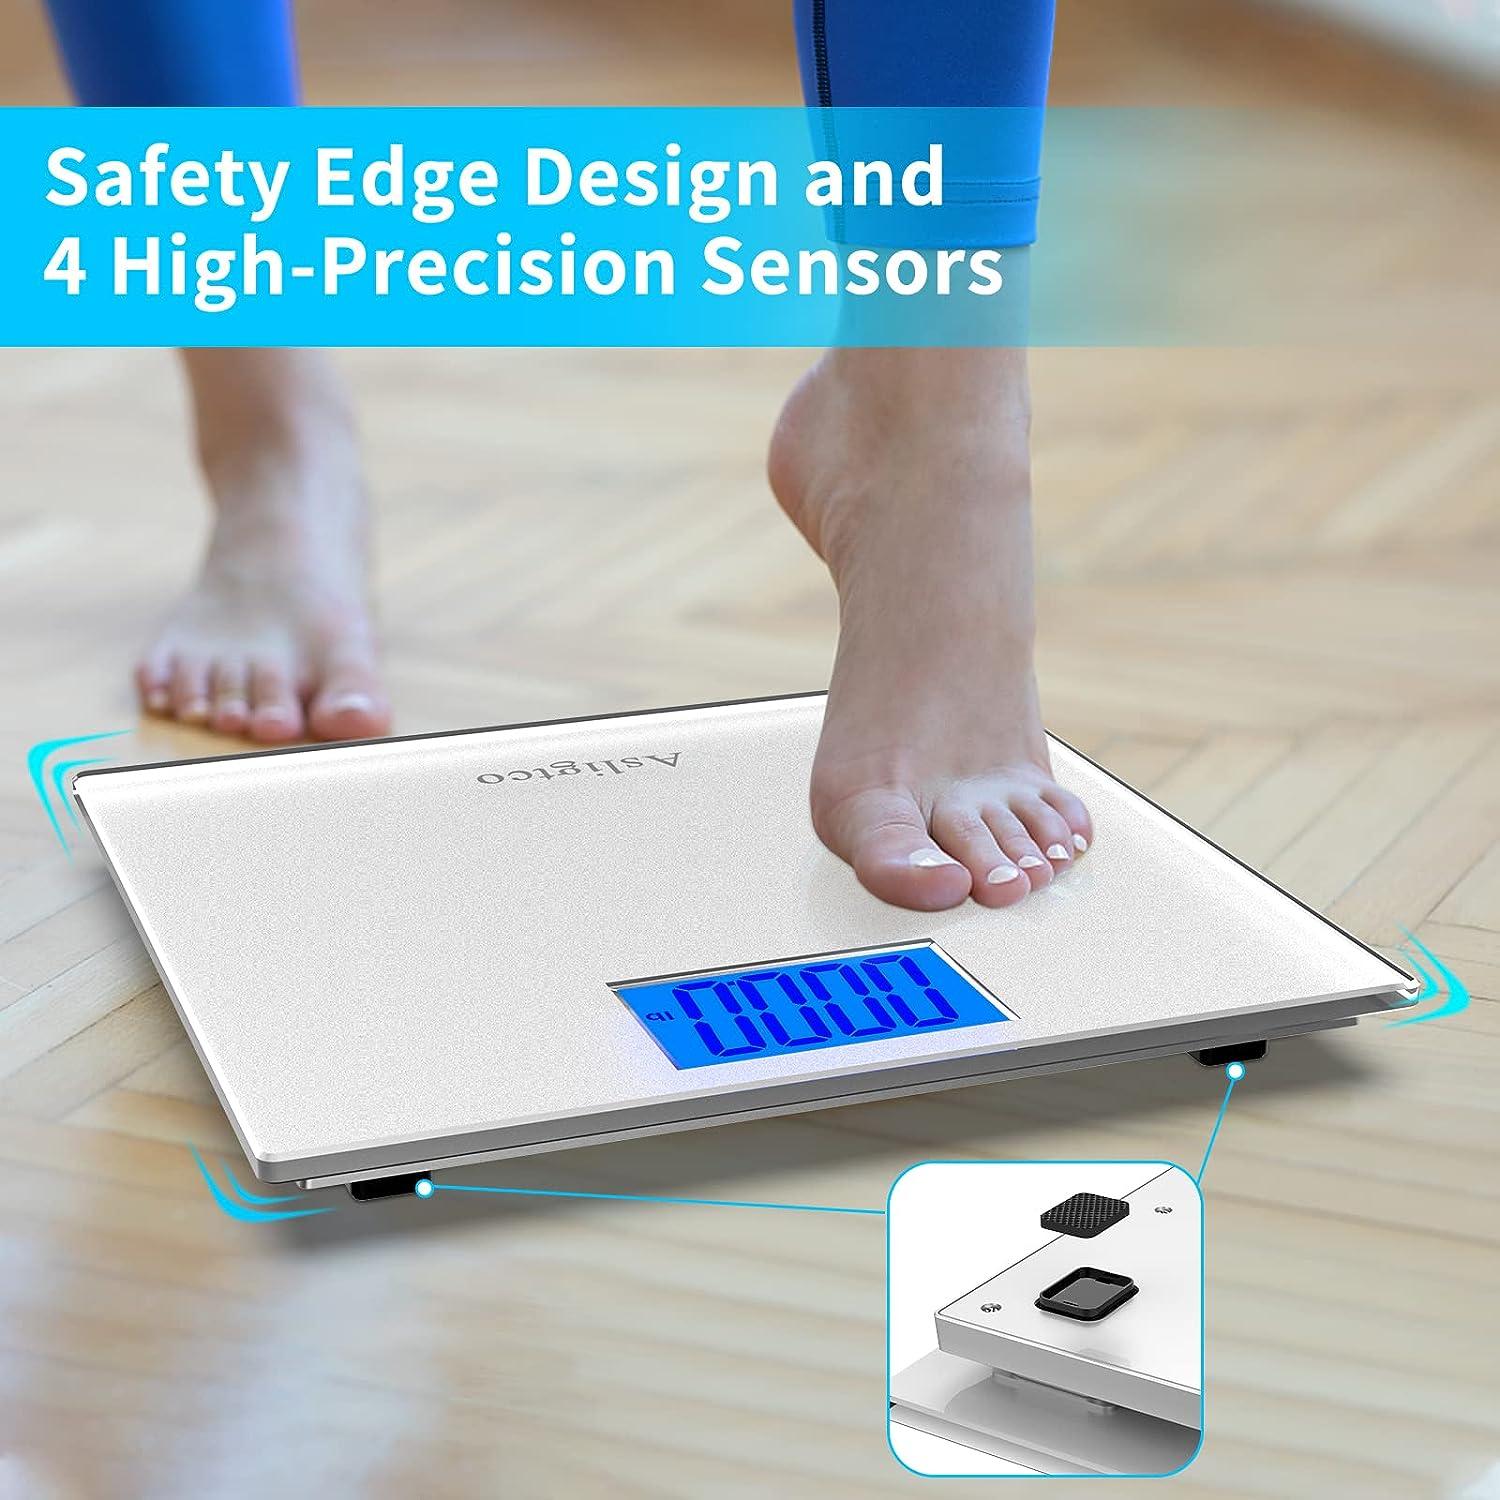 High Capacity Scales